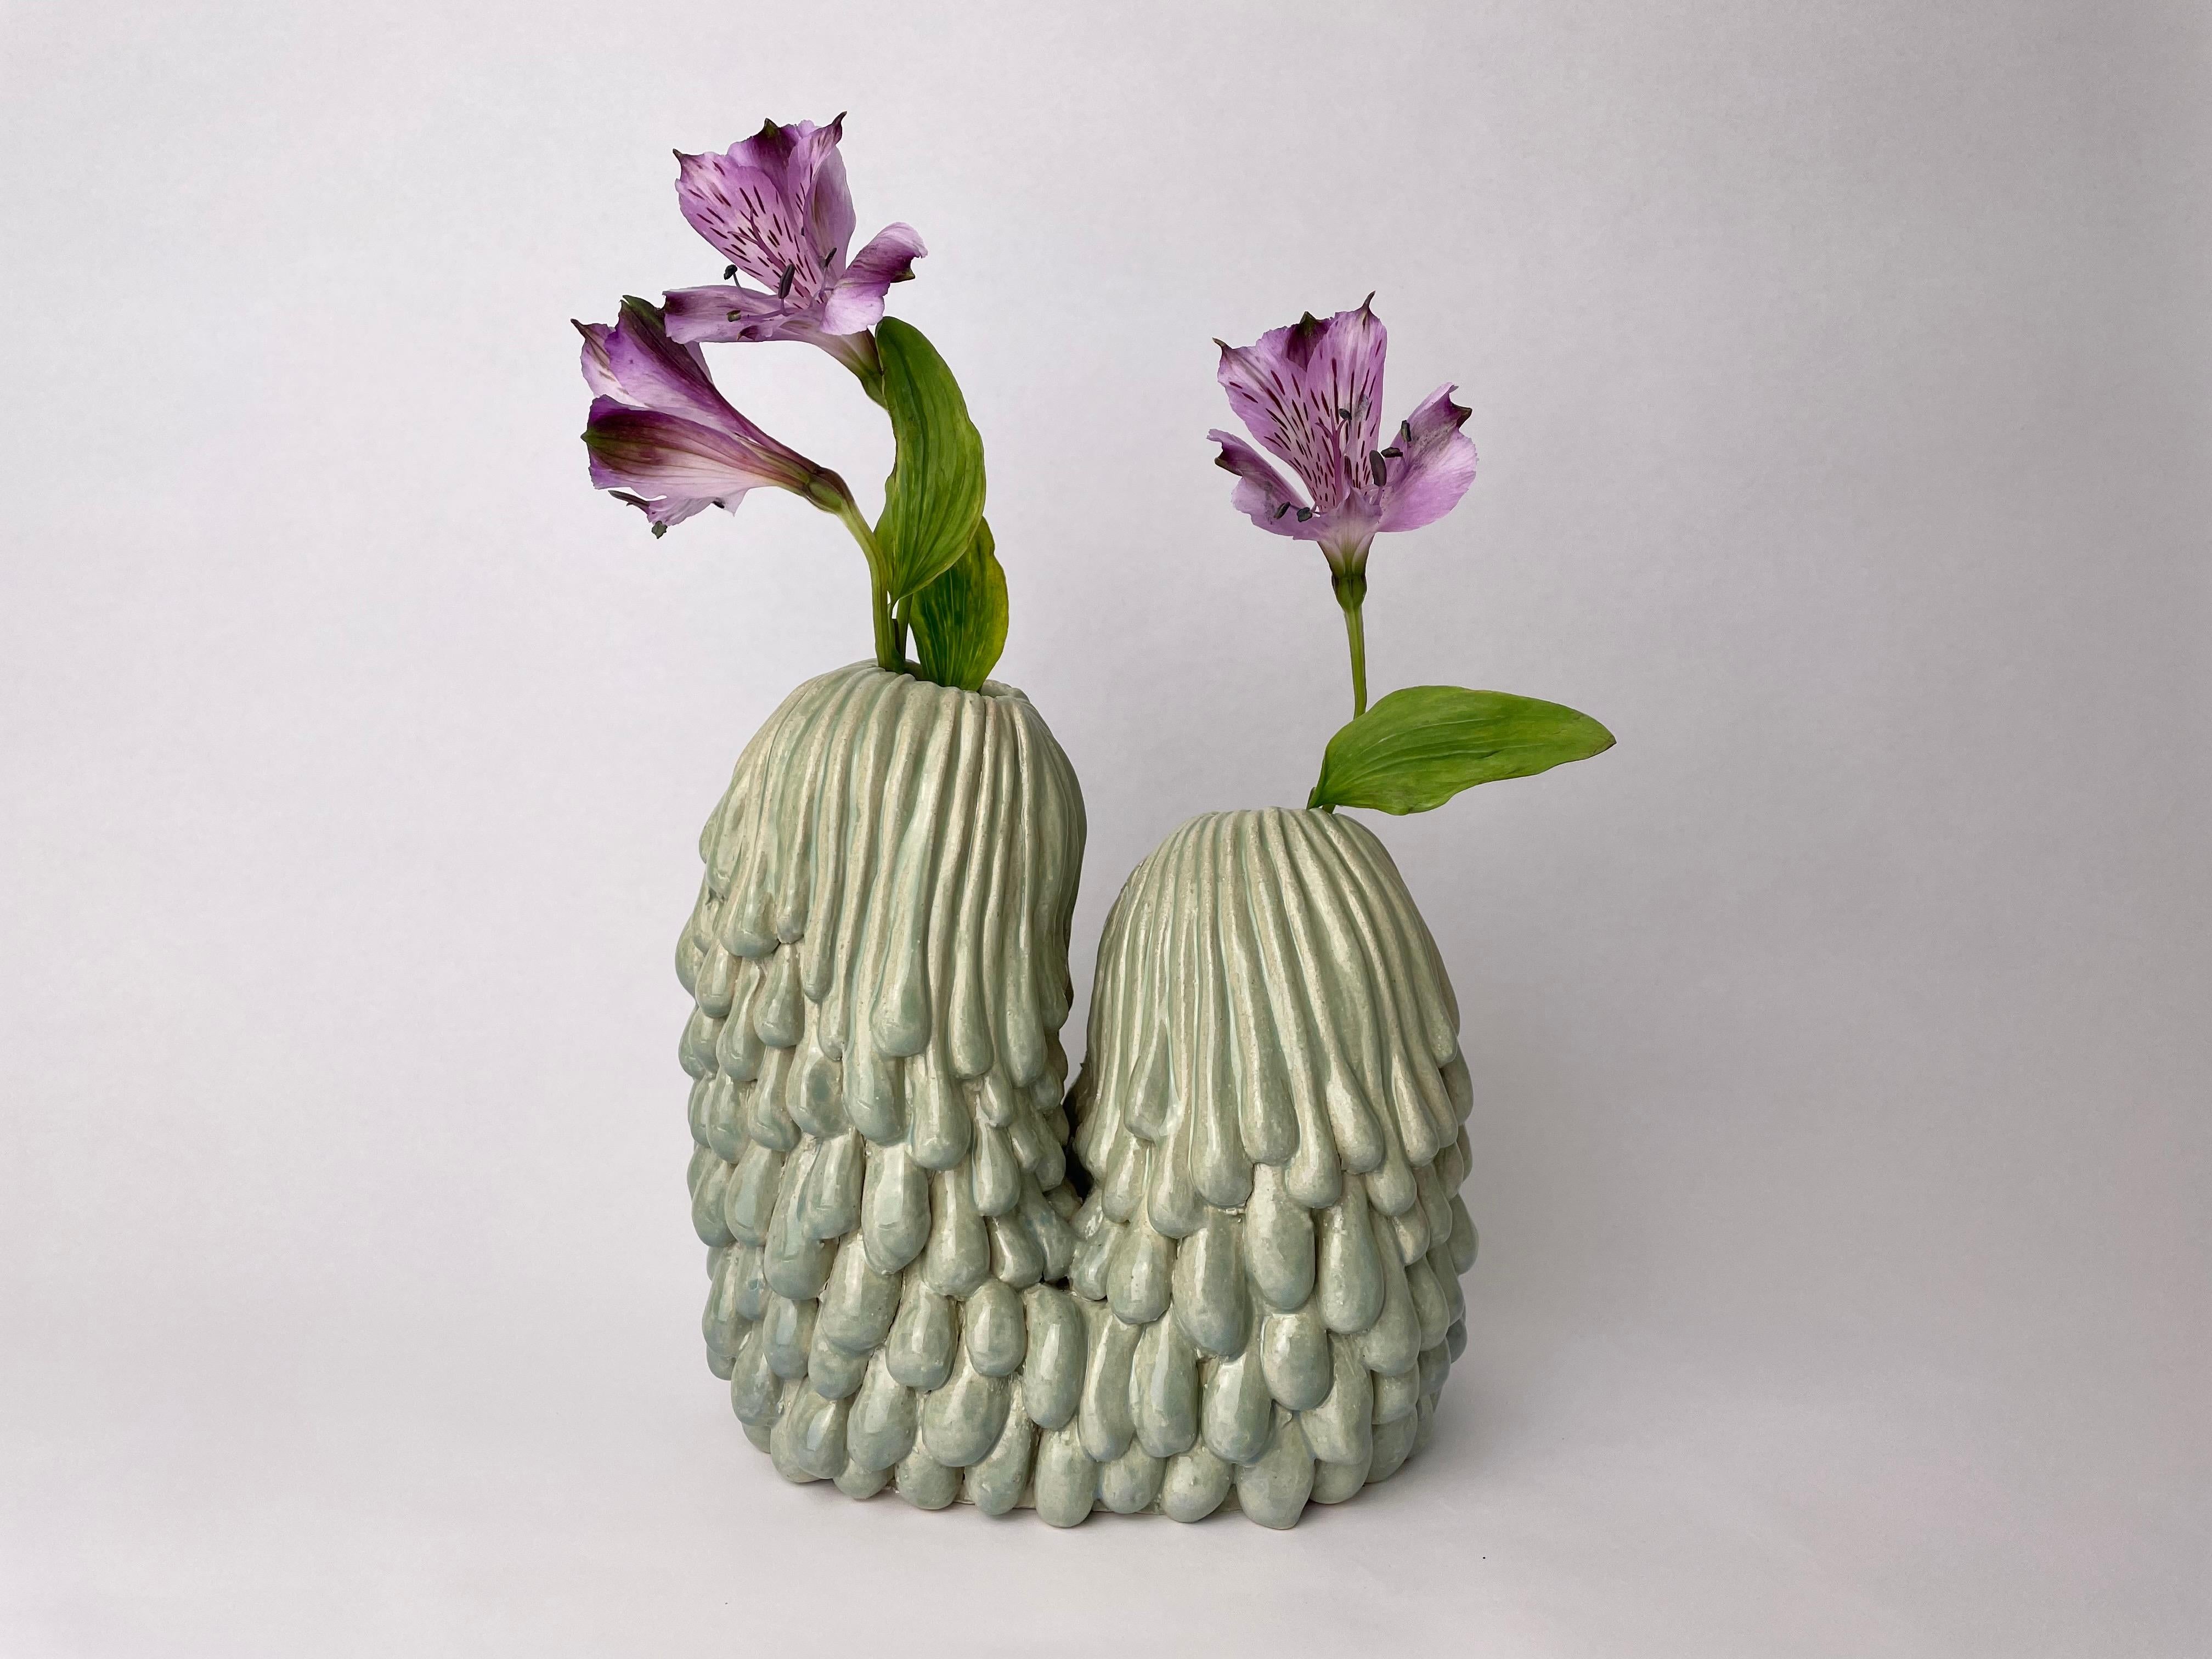 Grow vase by HS Studio
Morphic Collection
Dimensions: 17x 18 x 10cm
Materials: Ceramic

Hannah Simpson is a ceramic artist, based in Kent, UK. With a passion for creating unique items, Hannah's work continues to challenge the line between art